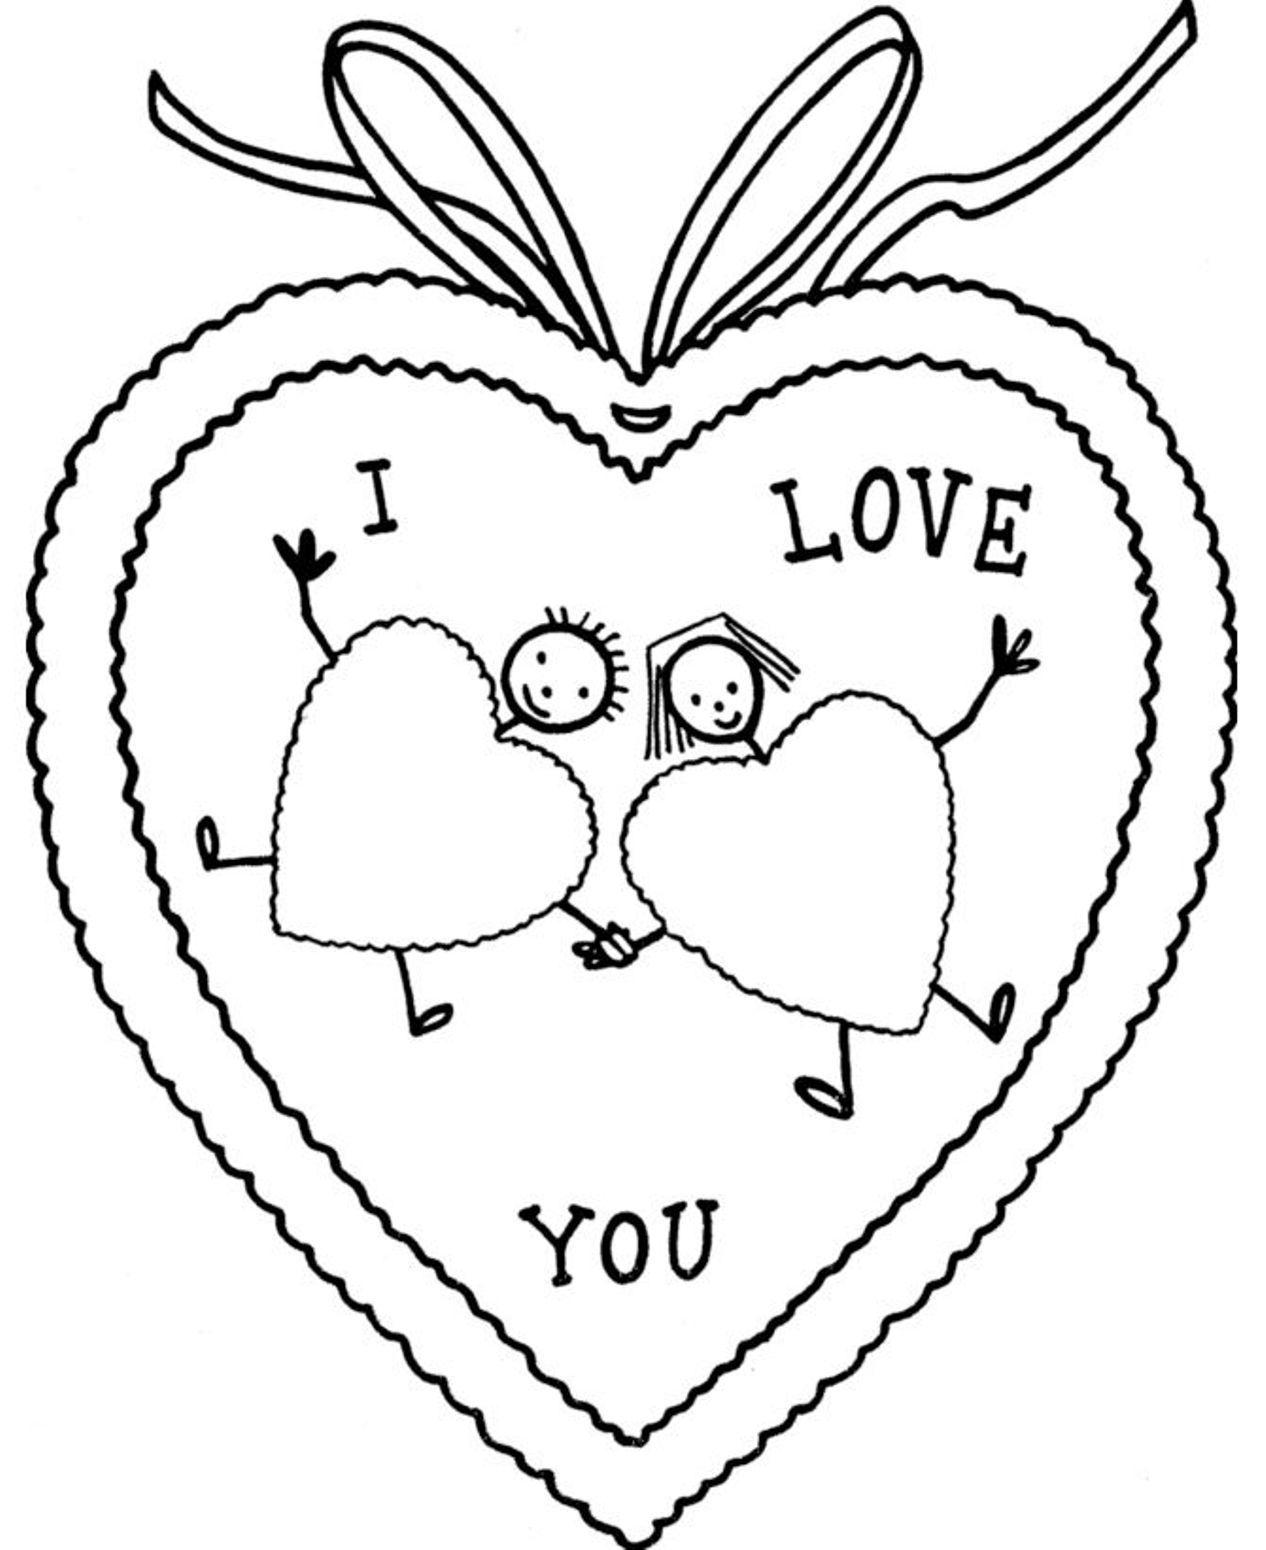 Valentines Day S I Love You Coloring Page